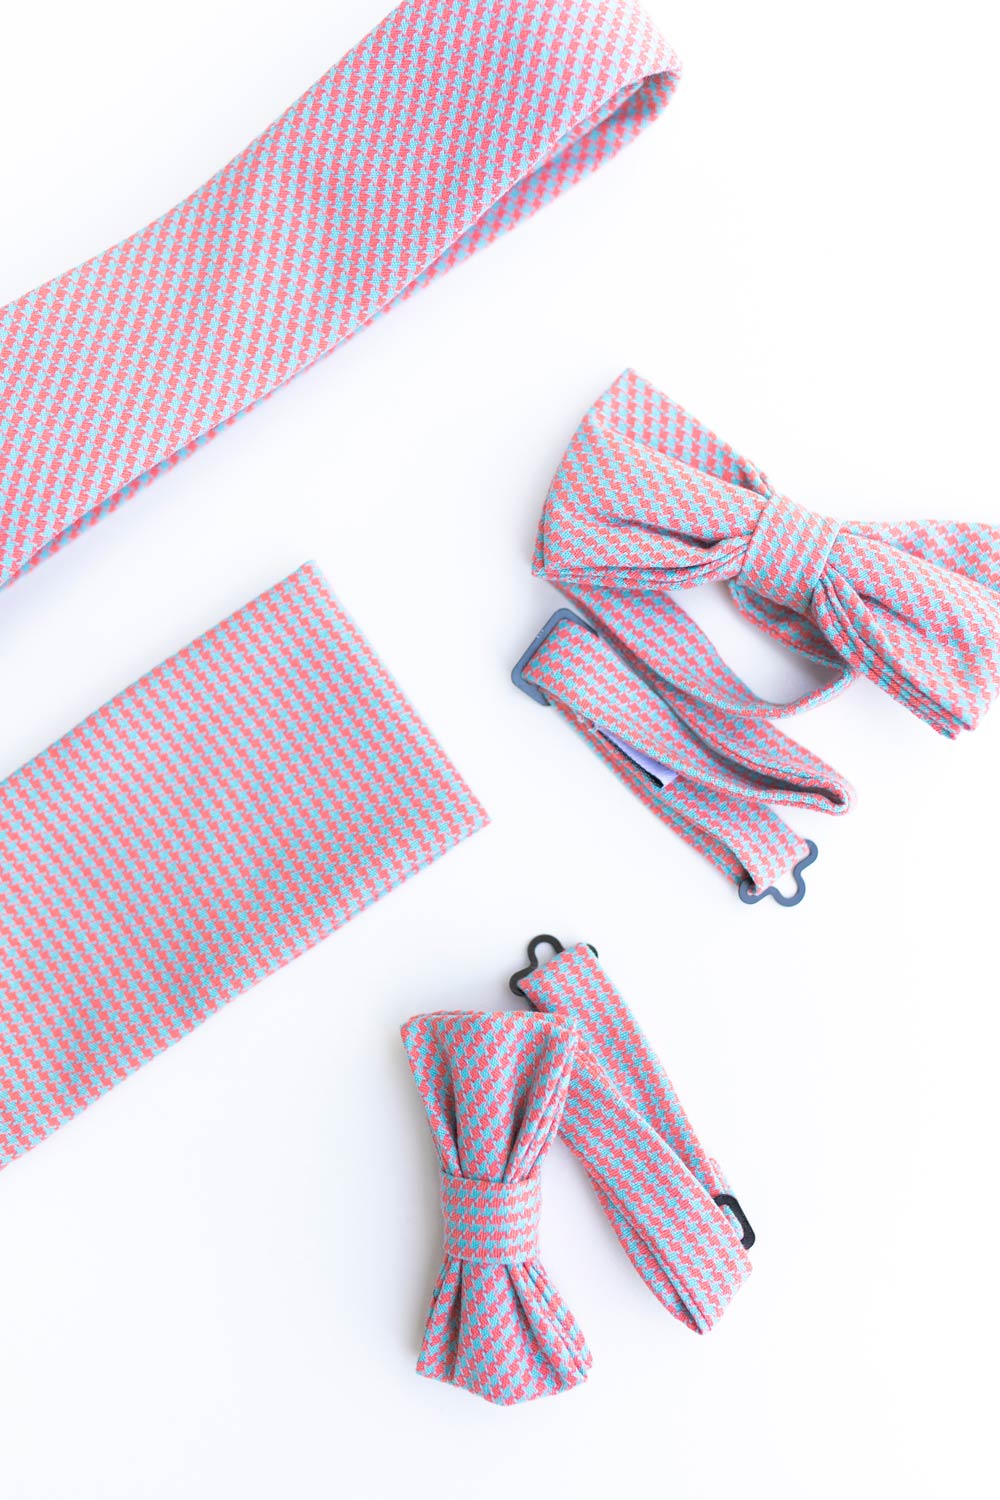 Opal weave pocket square photographed next to the matching tie and bow ties. 